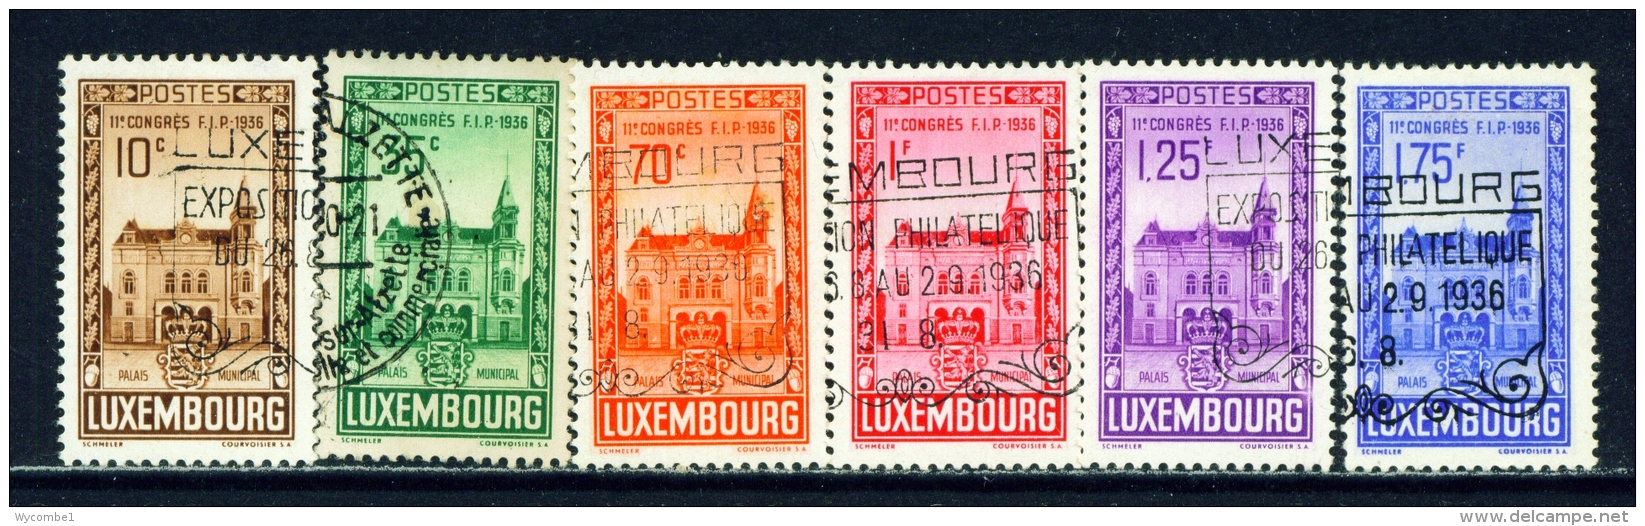 LUXEMBOURG  -  1936  Philatelic Congress  Set  Used As Scan - Oblitérés